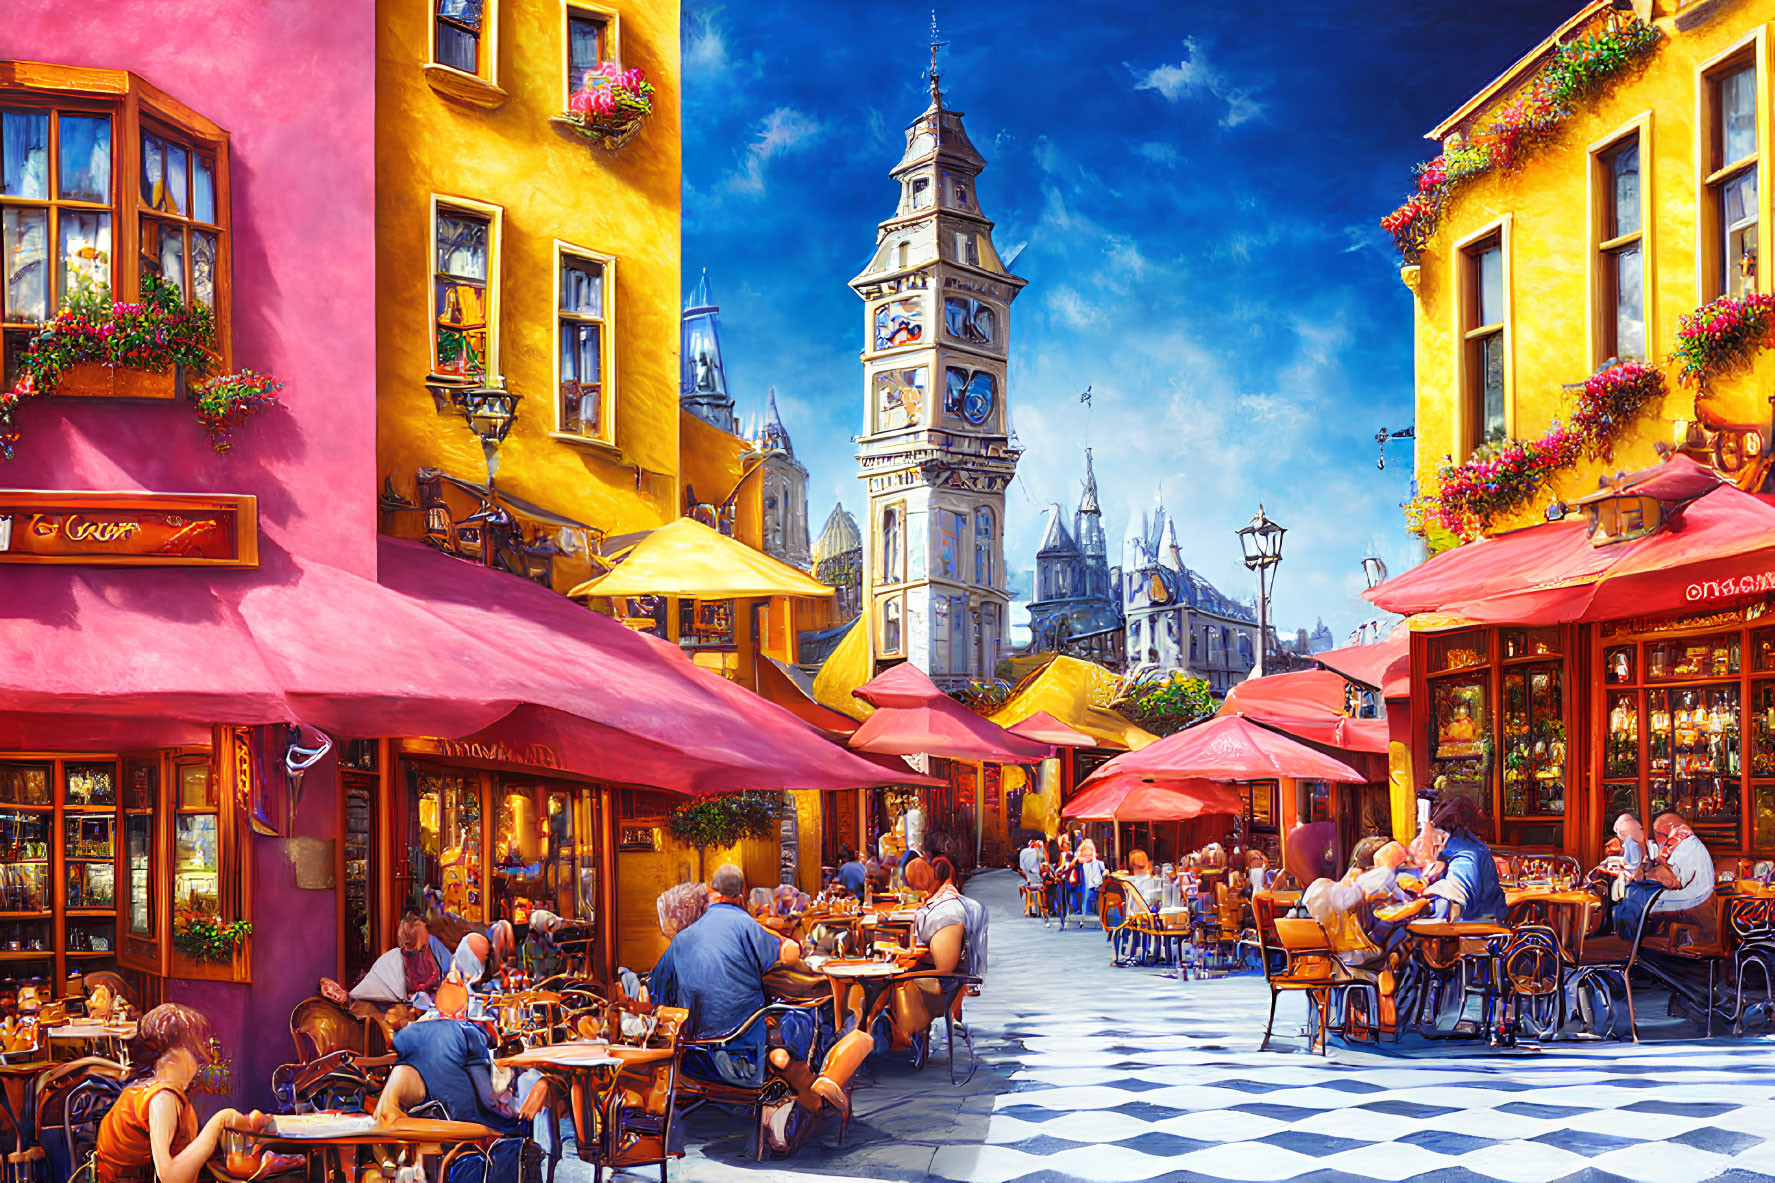 Colorful sidewalk cafes and clock tower in vibrant street scene